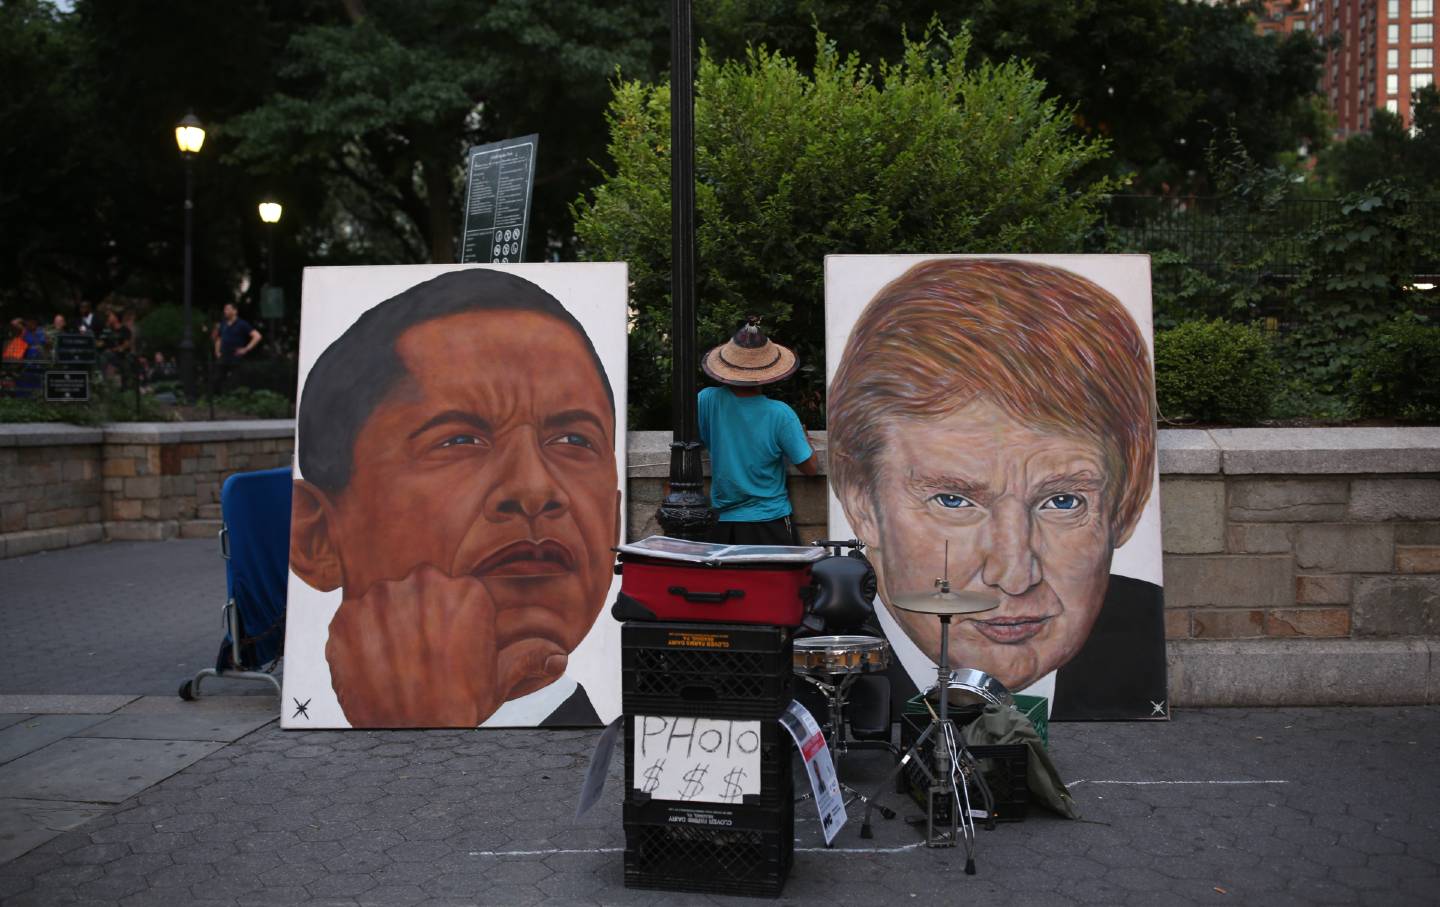 Paintings of Donald Trump and Barack Obama's faces are displayed outside a park in New York CIty